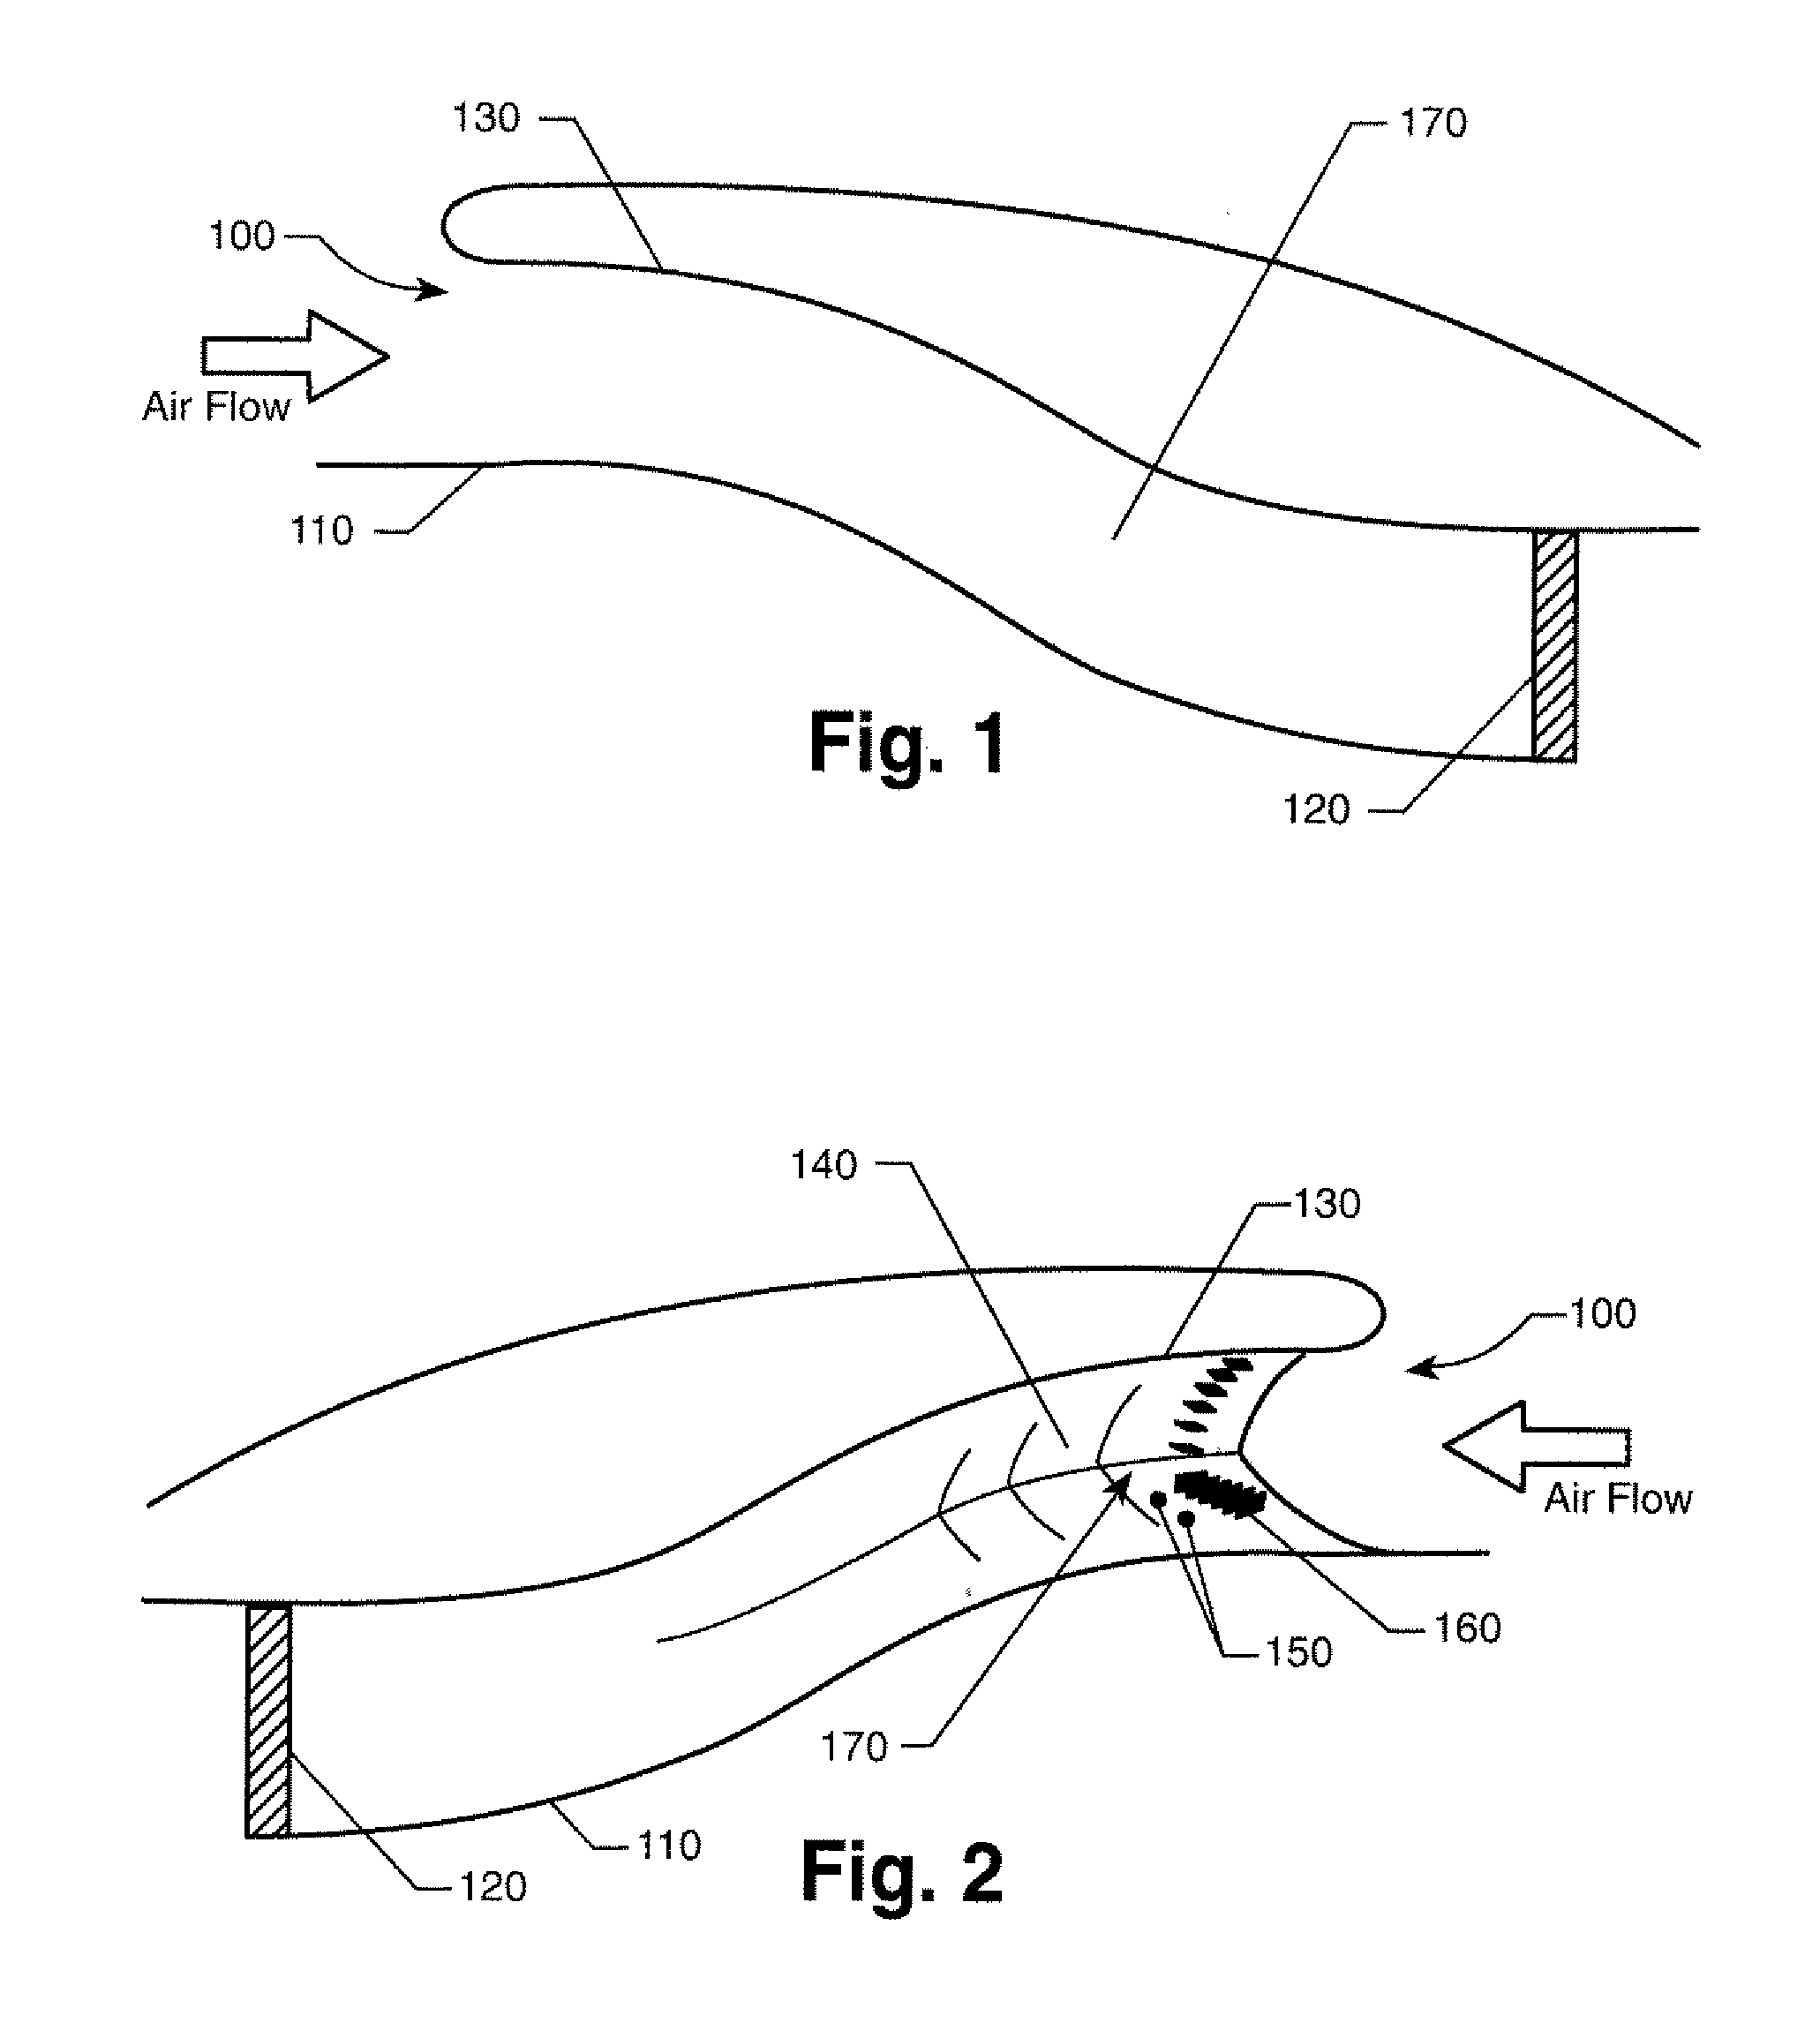 Boundary-Layer-Ingesting Inlet Flow Control System